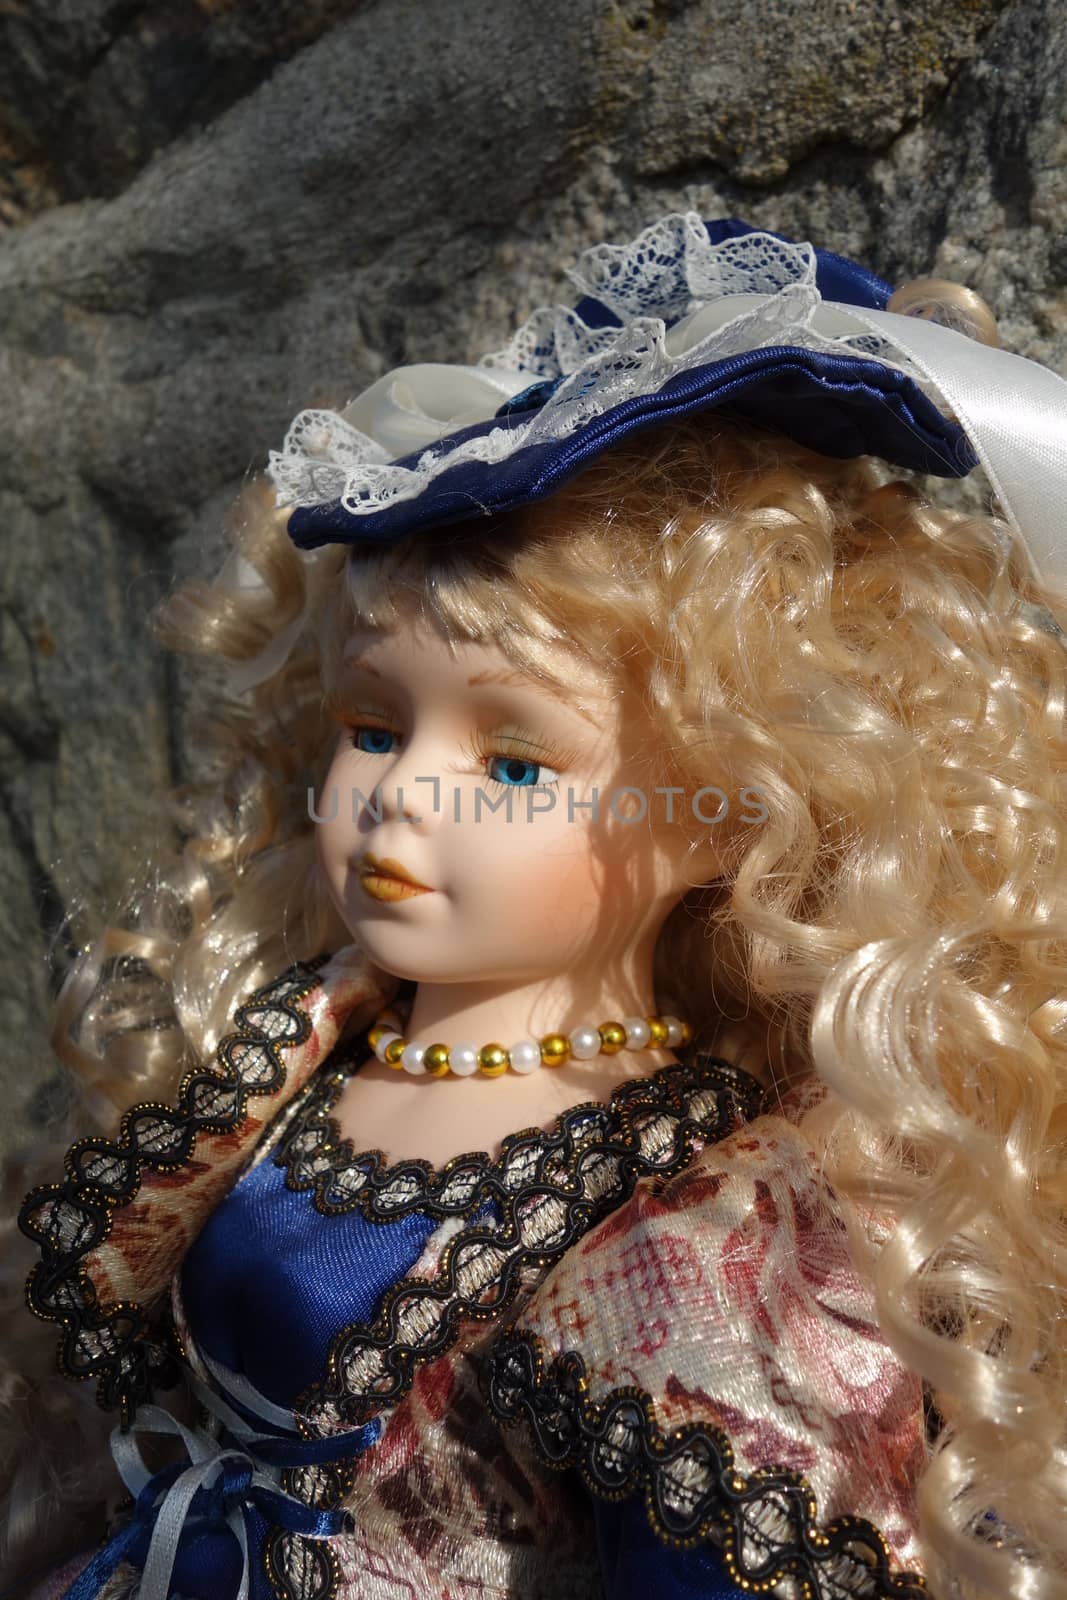 Porcelain doll by Therese